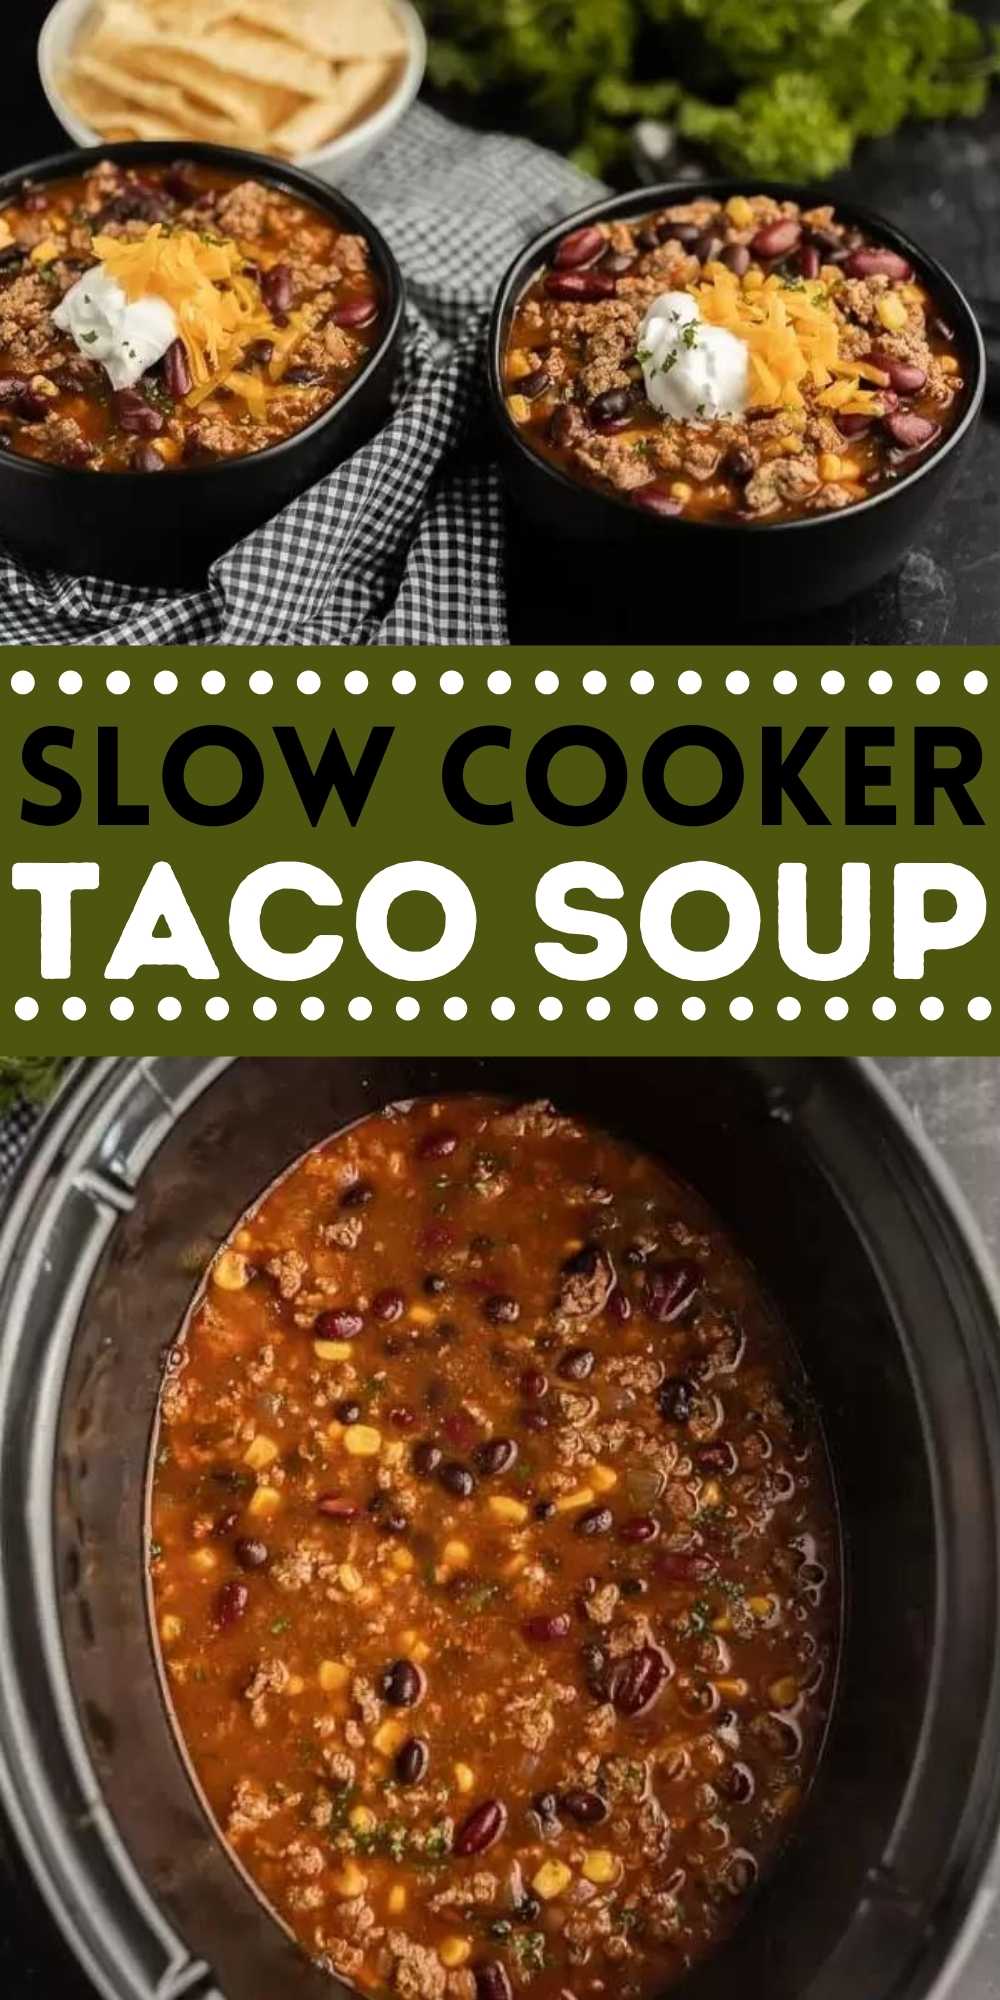 Crockpot Taco Soup Recipe is one of my go to meals on busy weeks because it is so easy. The flavor is just amazing and the entire family goes crazy over it. This Easy Slow Cooker Taco Soup Recipe made with ground beef is easy to make and packed with flavor too!  This crock pot taco soup is also great to feed a crowd. #eatingonadime #souprecipes #beefrecipes #crockpotrecipes #slowcookerrecipes 
